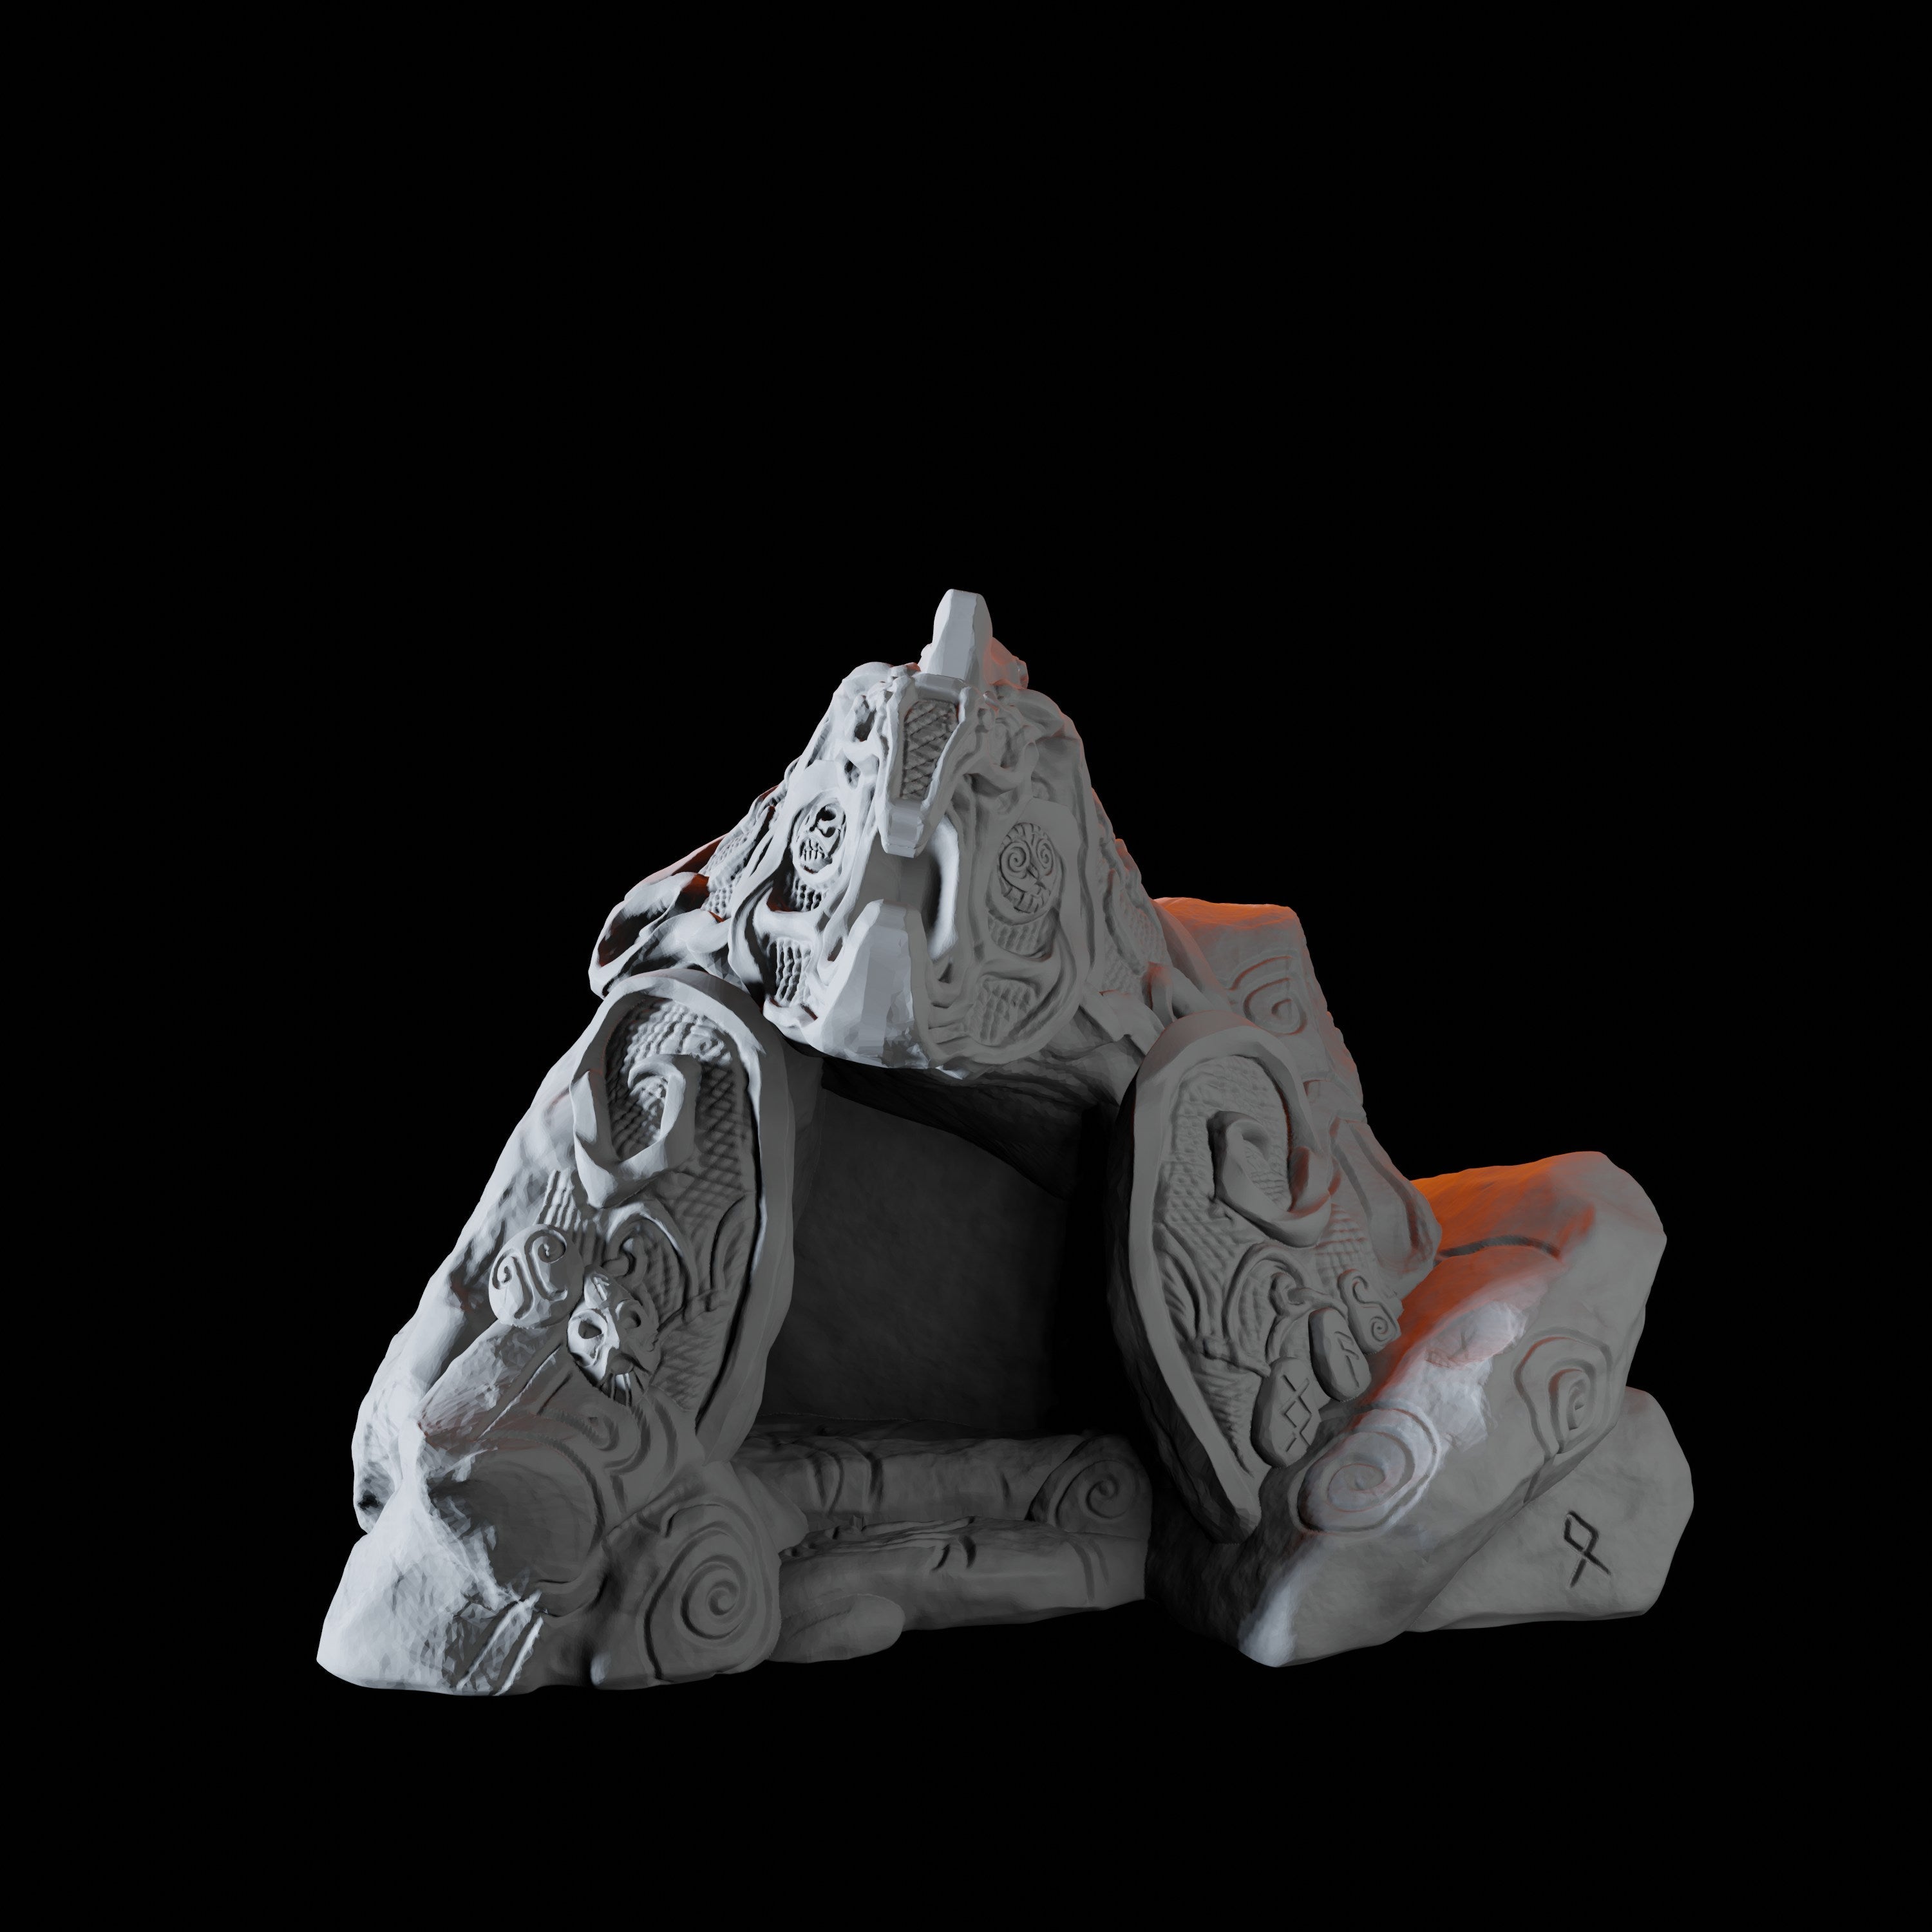 Dwarven Ruins Entrance - Cave Scatter Terrain Miniature for Dungeons and Dragons - Myth Forged